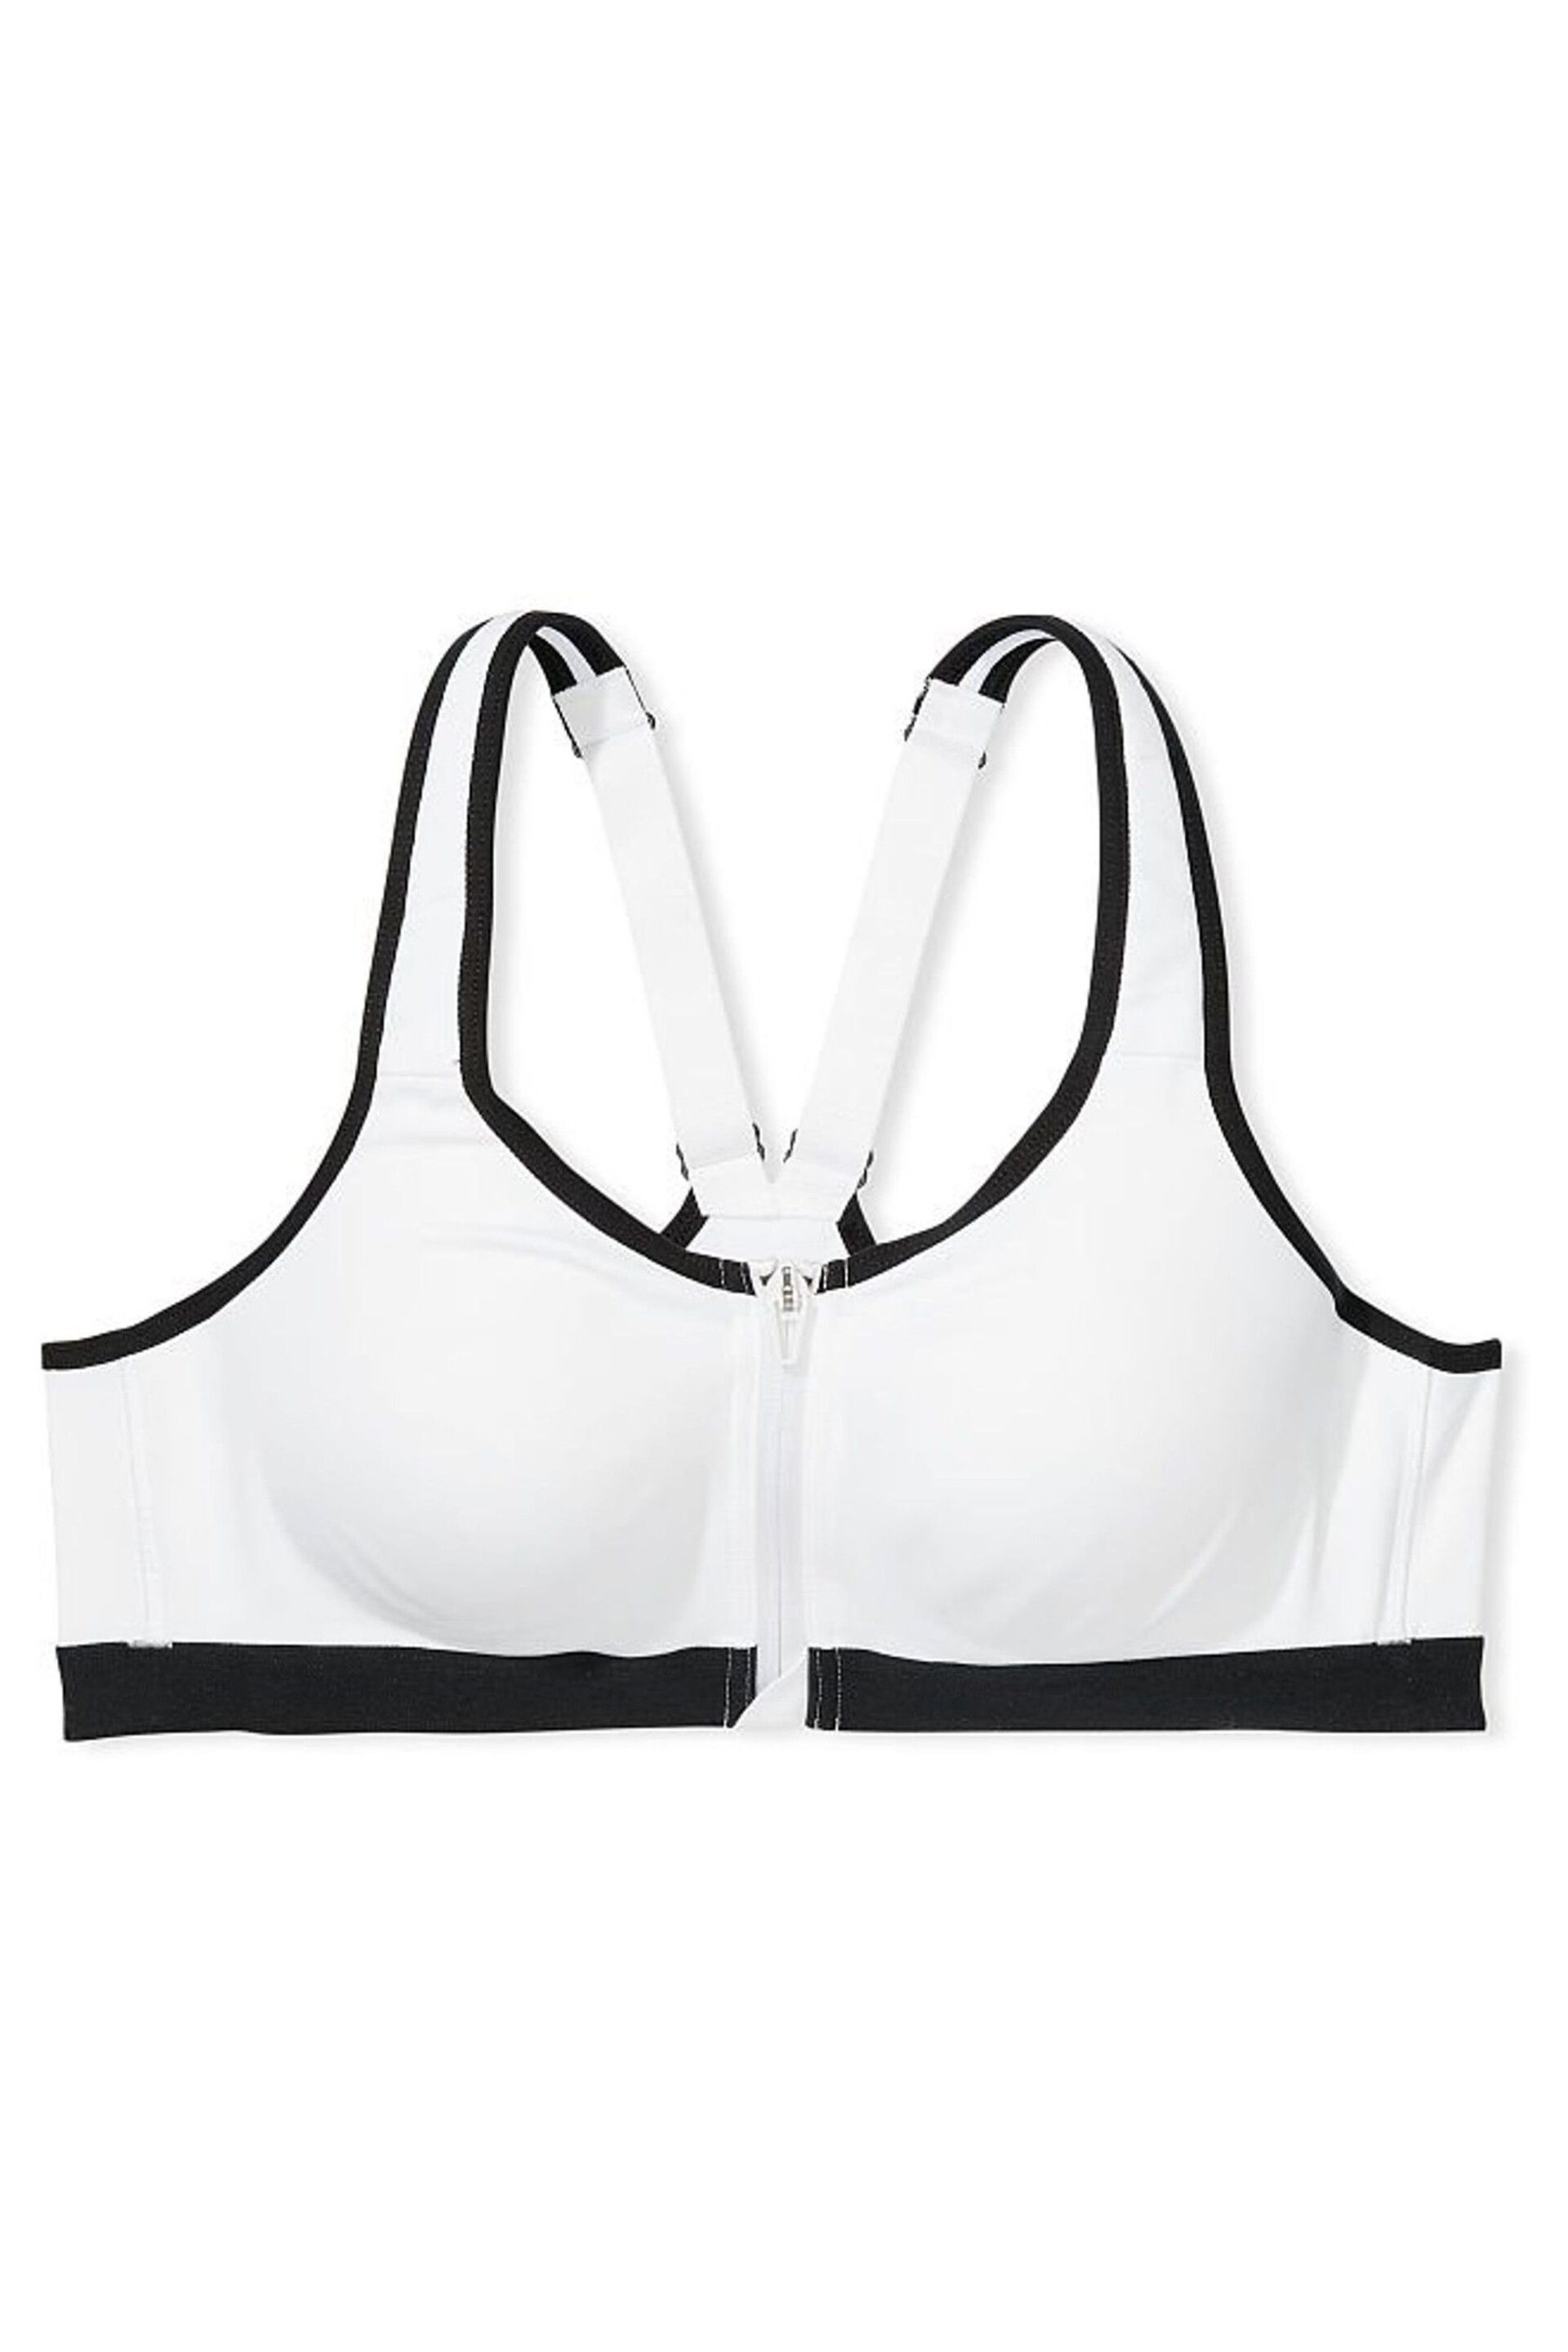 Victoria's Secret White Smooth Front Fastening Wired High Impact Sports Bra - Image 3 of 5